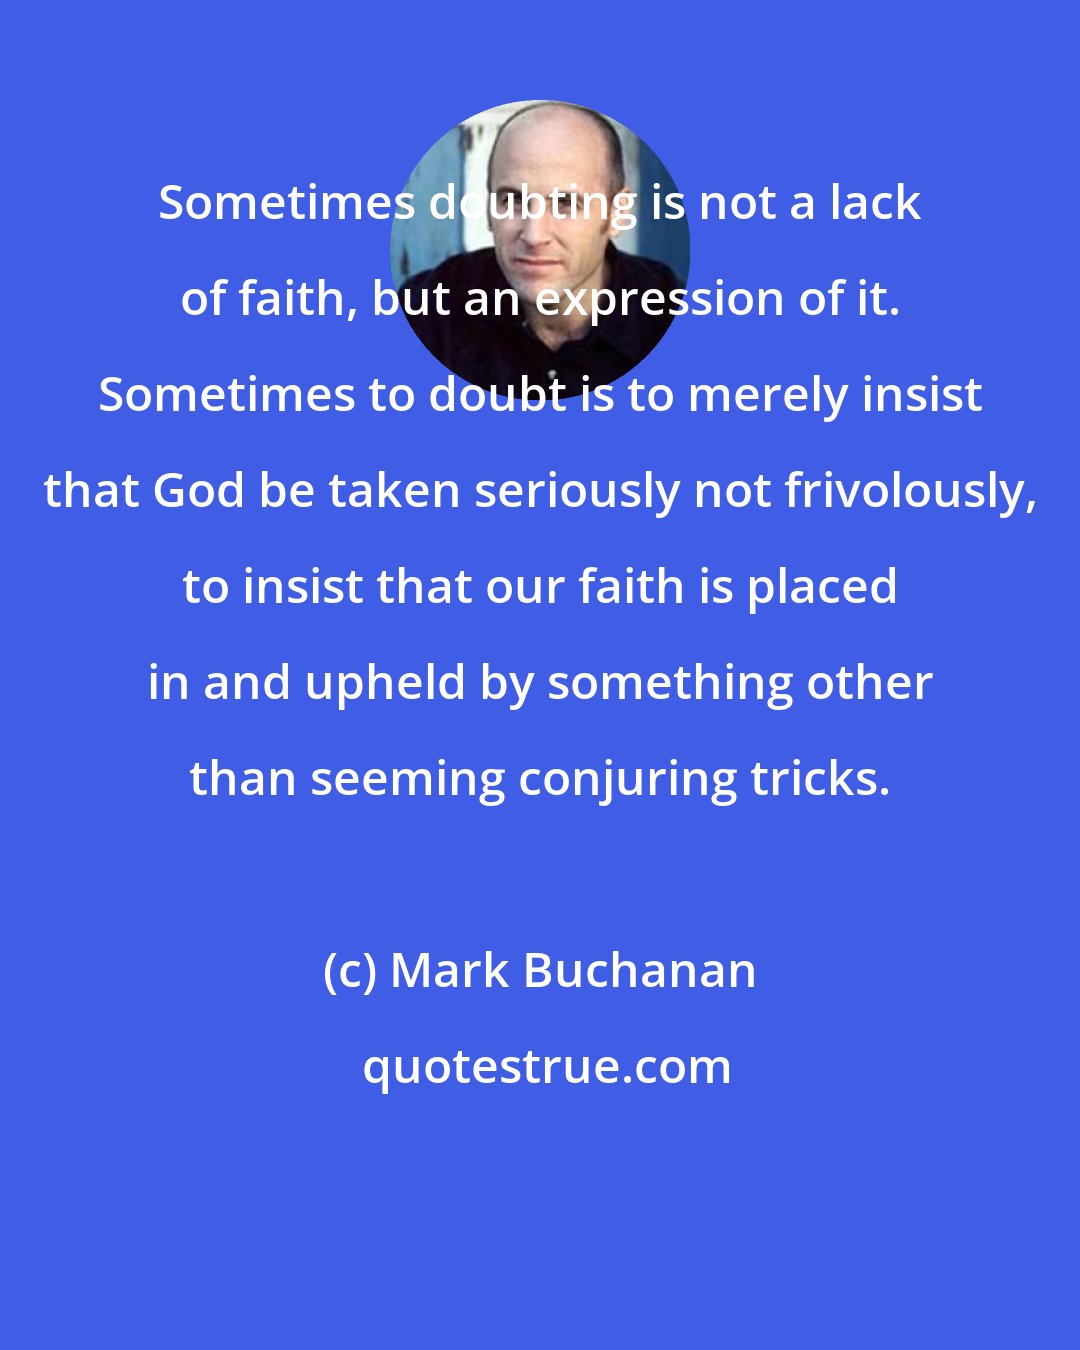 Mark Buchanan: Sometimes doubting is not a lack of faith, but an expression of it. Sometimes to doubt is to merely insist that God be taken seriously not frivolously, to insist that our faith is placed in and upheld by something other than seeming conjuring tricks.